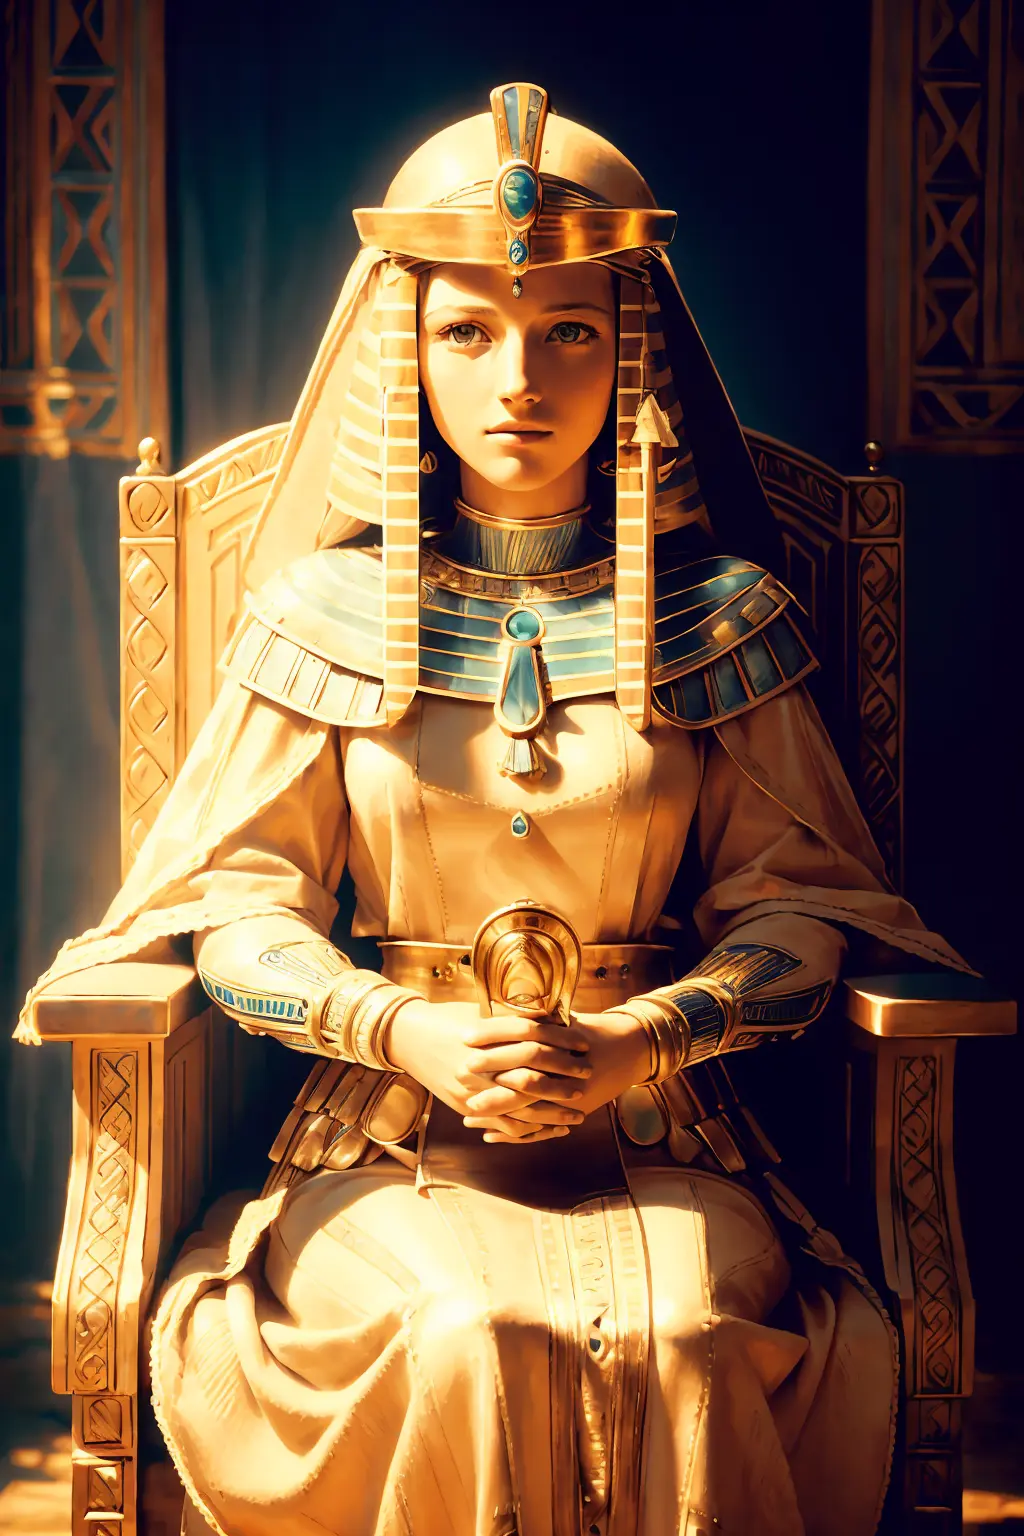 AshleyCipher  OldEgyptAI 
1 woman, queen of egypt, sitting on the throne,
(35mmstyle:1.1), front, masterpiece, 1970s film, , cinematic lighting, photorealistic, high frequency details, 35mm film, (film grain), film noise, 